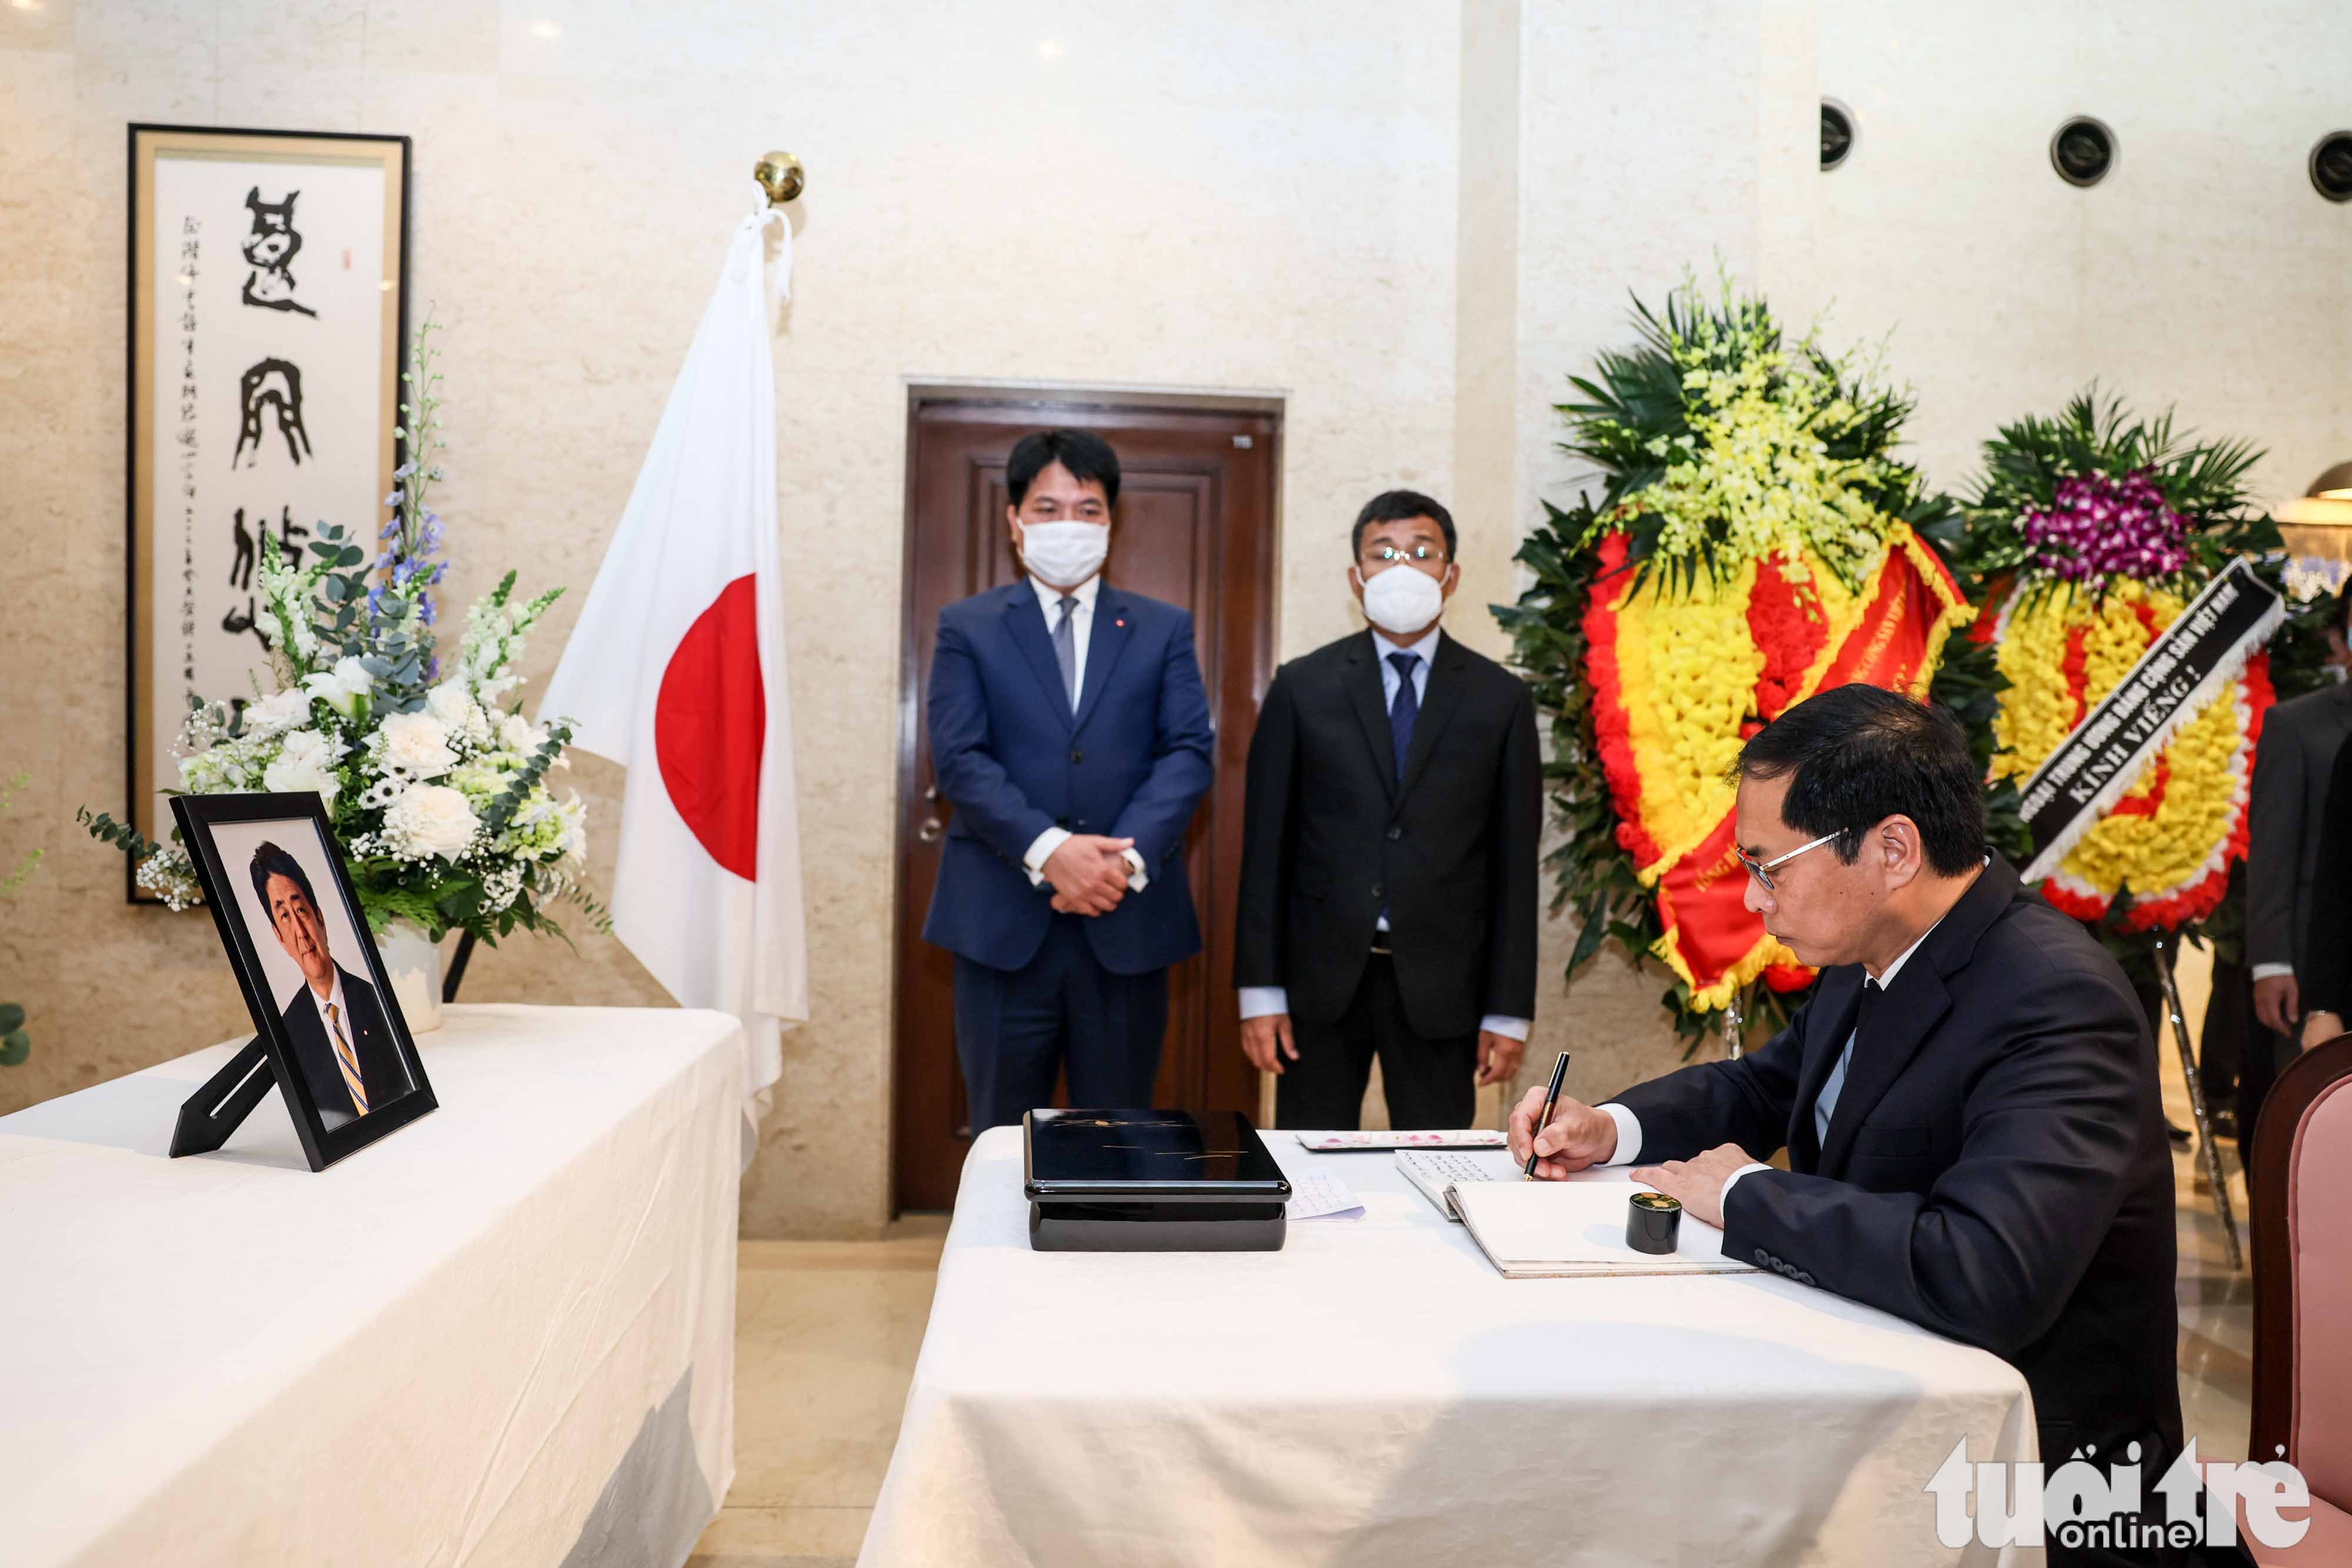 Vietnamese Minister of Foreign Affairs Bui Thanh Son writes on the condolence book for former Japanese Prime Minister Shinzo Abe at the Embassy of Japan in Hanoi, July 11, 2022. Photo: Nguyen Khanh / Tuoi Tre